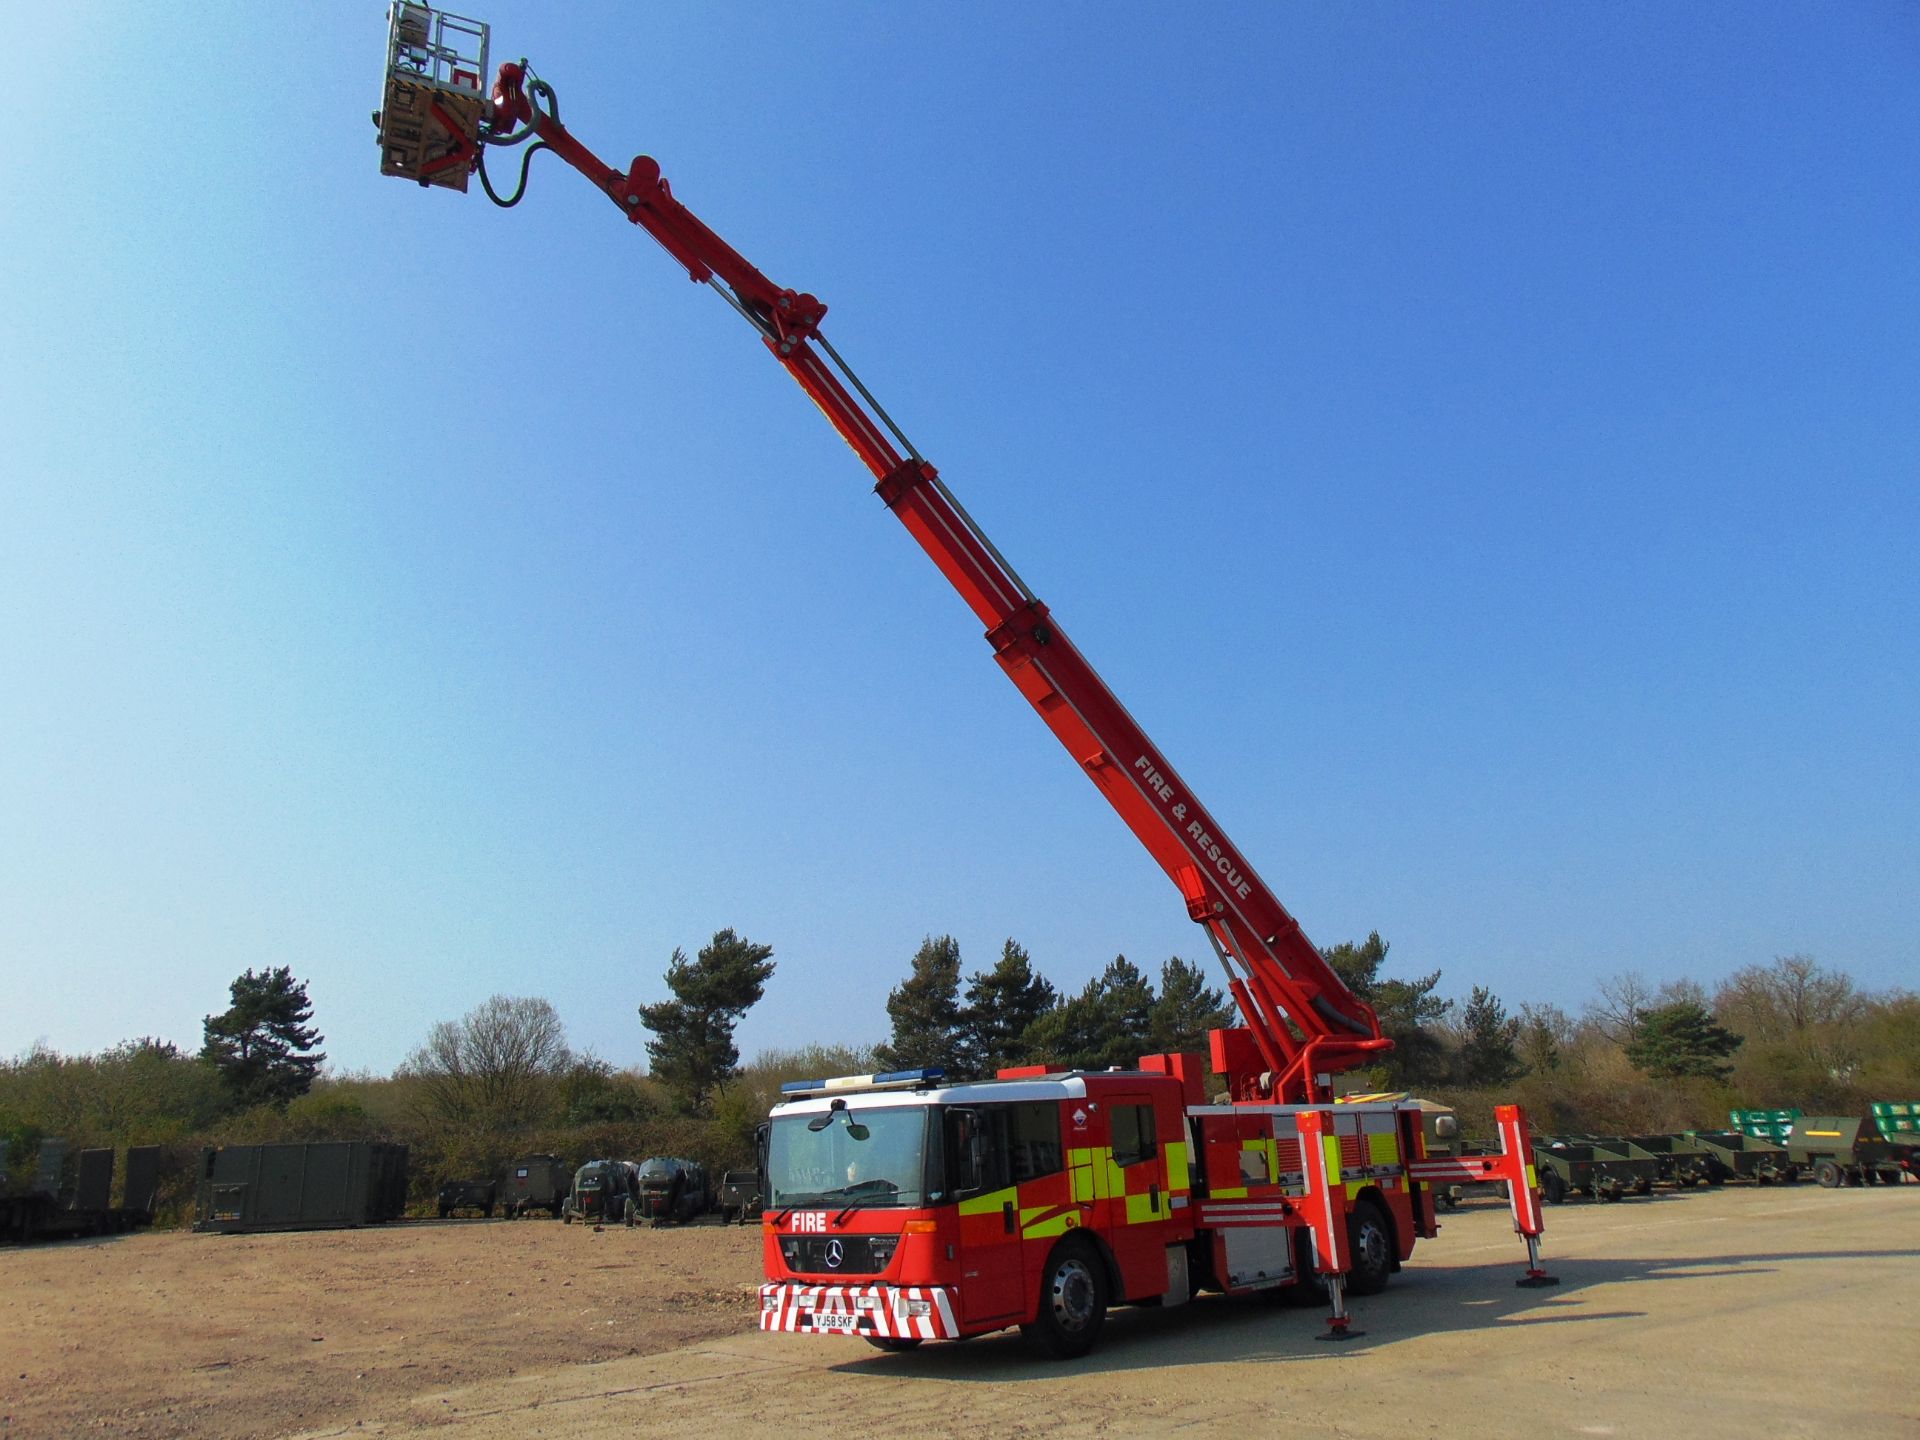 2008 Mercedes Econic CARP (Combined Aerial Rescue Pump) 6x2 Aerial Work Platform / Fire Appliance - Image 10 of 49